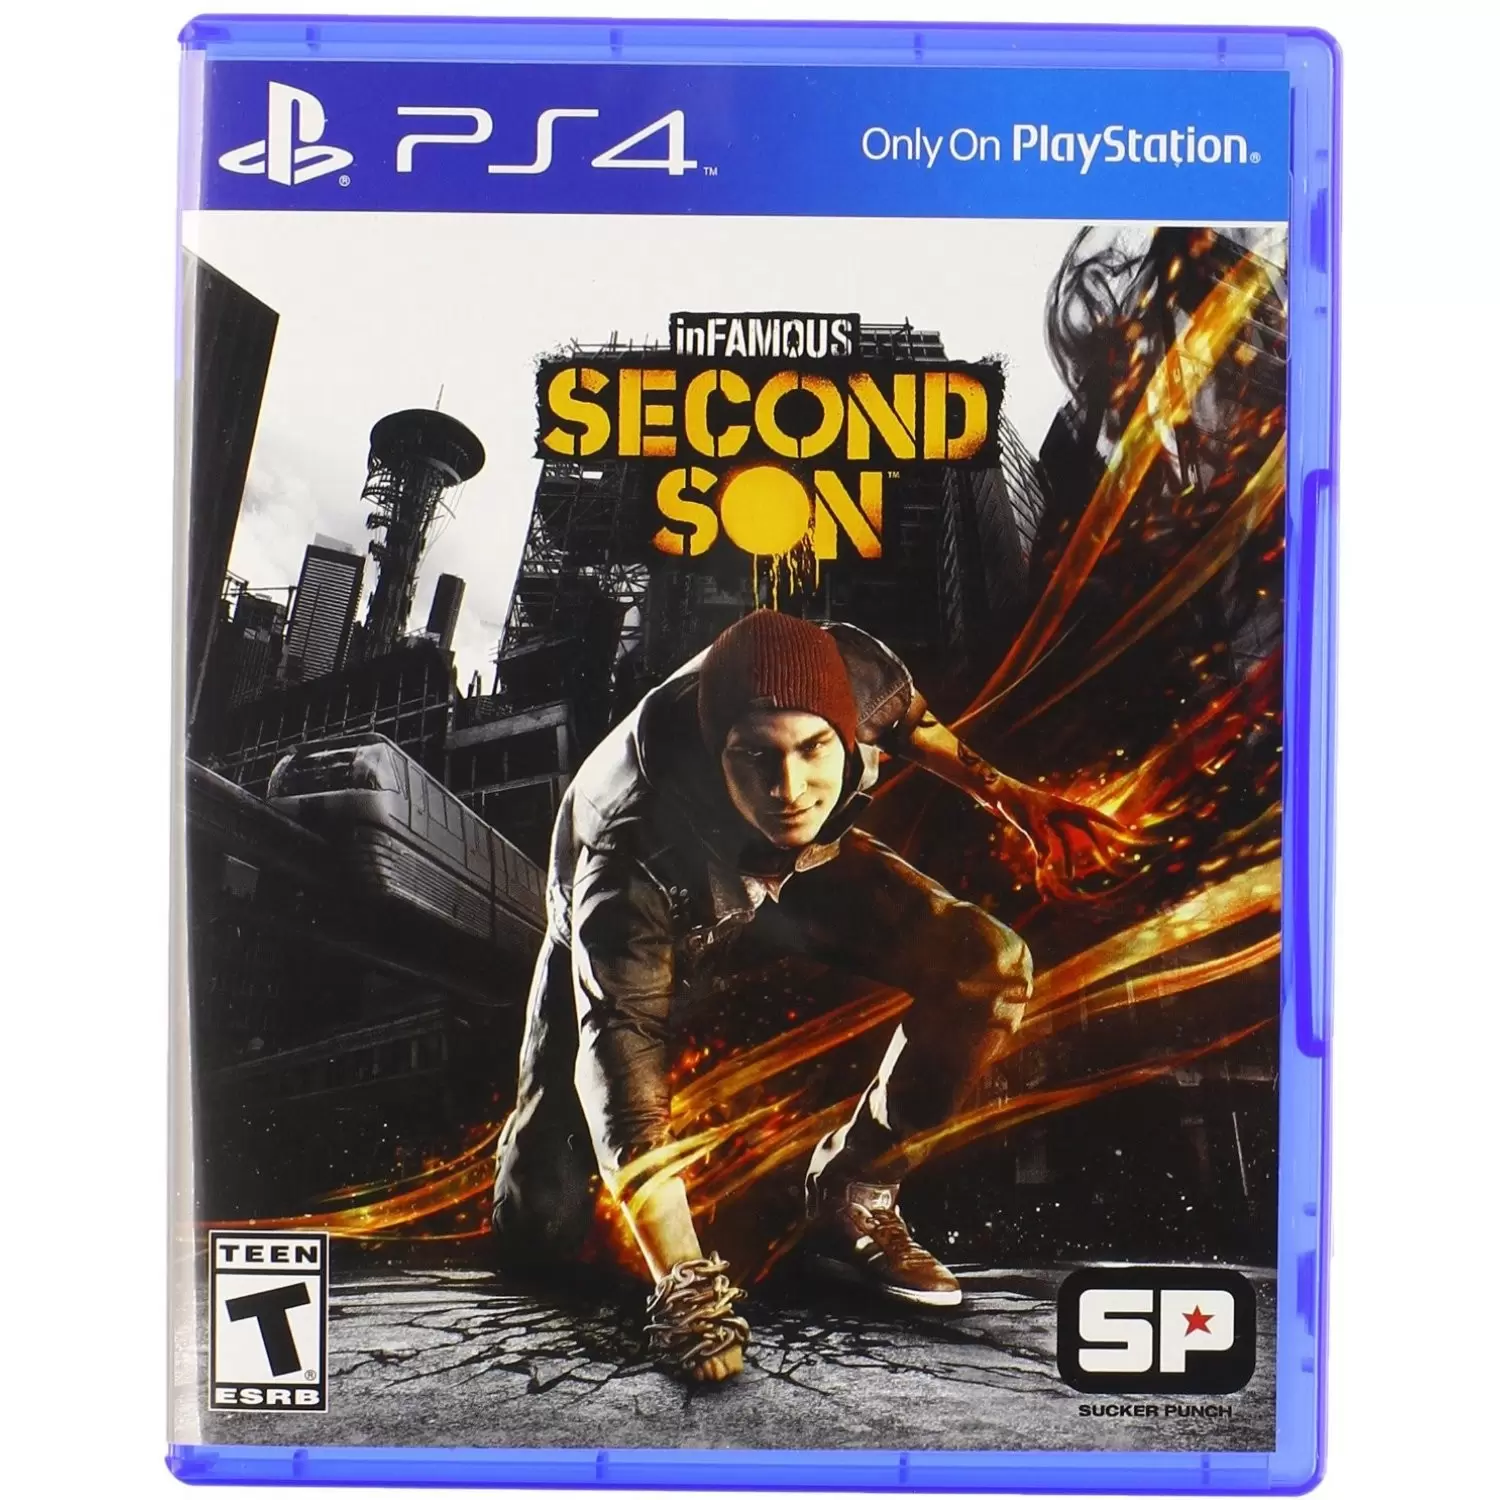 PS4 Games - Infamous: Second Son